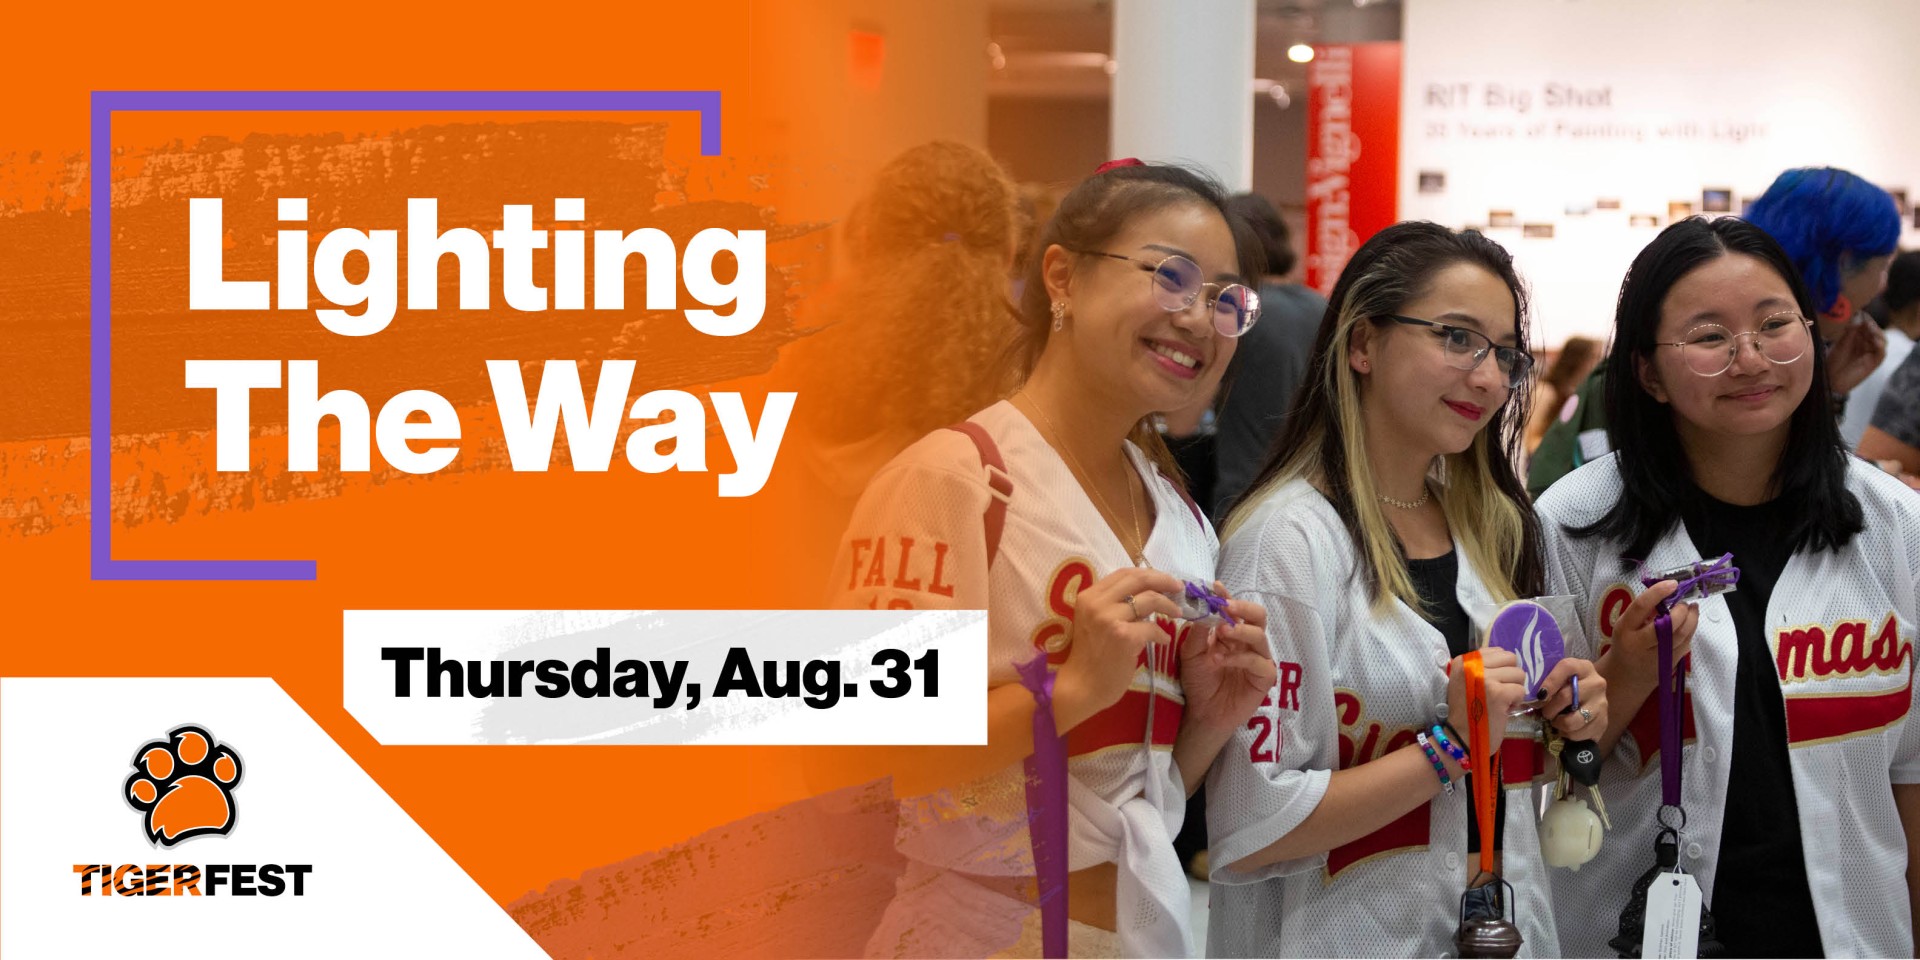 A graphic featuring a photo of women holding desserts with text "Lighting the Way, Thursday, Aug. 31, TigerFest"